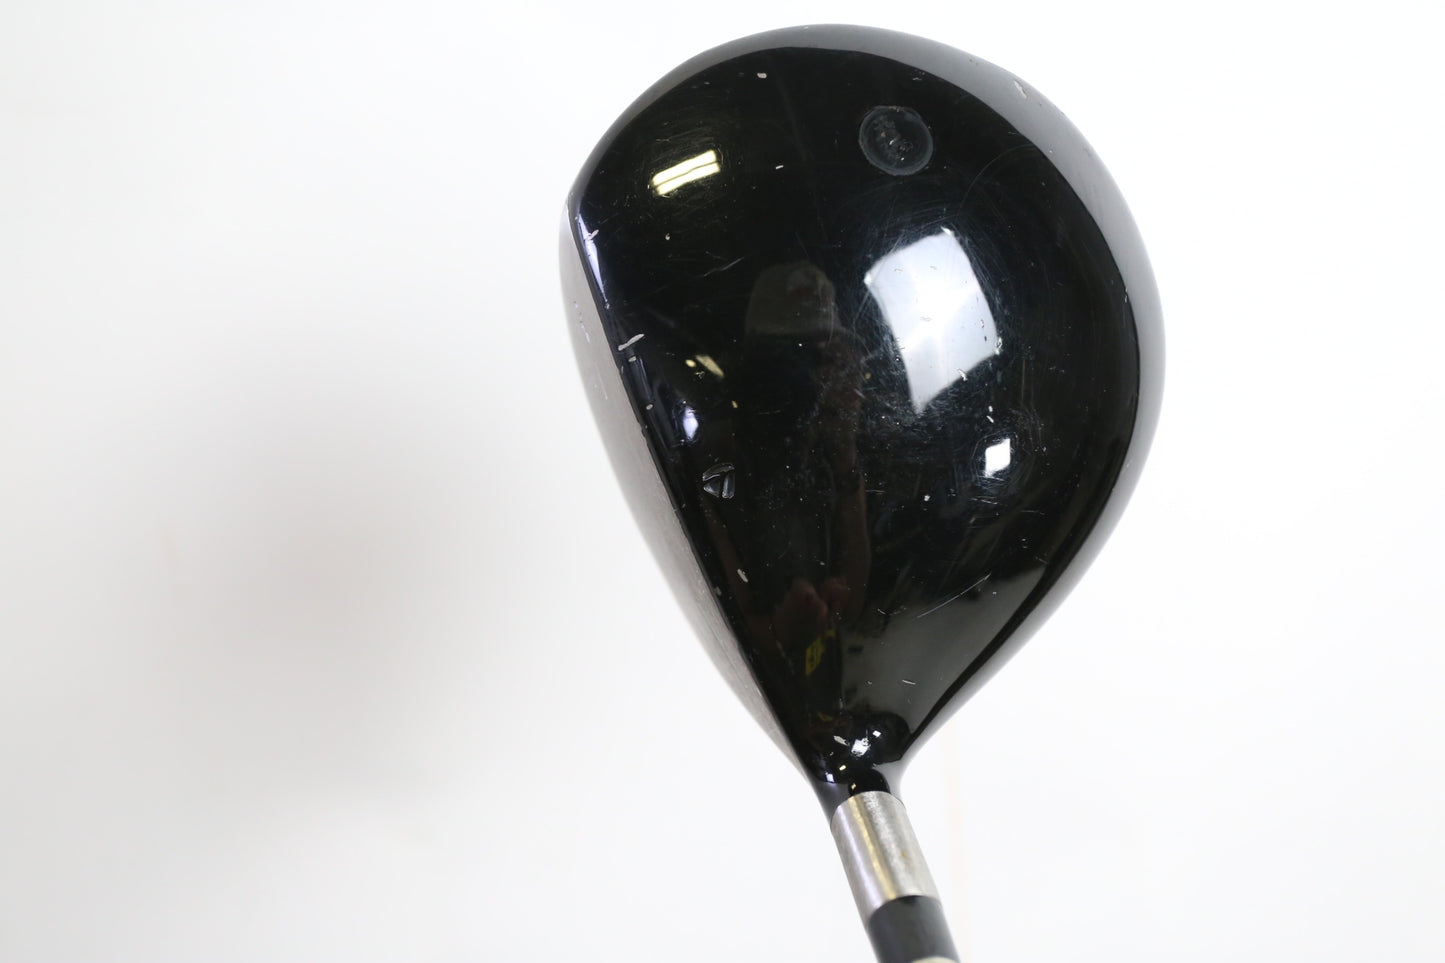 Used TaylorMade r7 425 Driver - Right-Handed - 11.5 Degrees - Regular Flex-Next Round